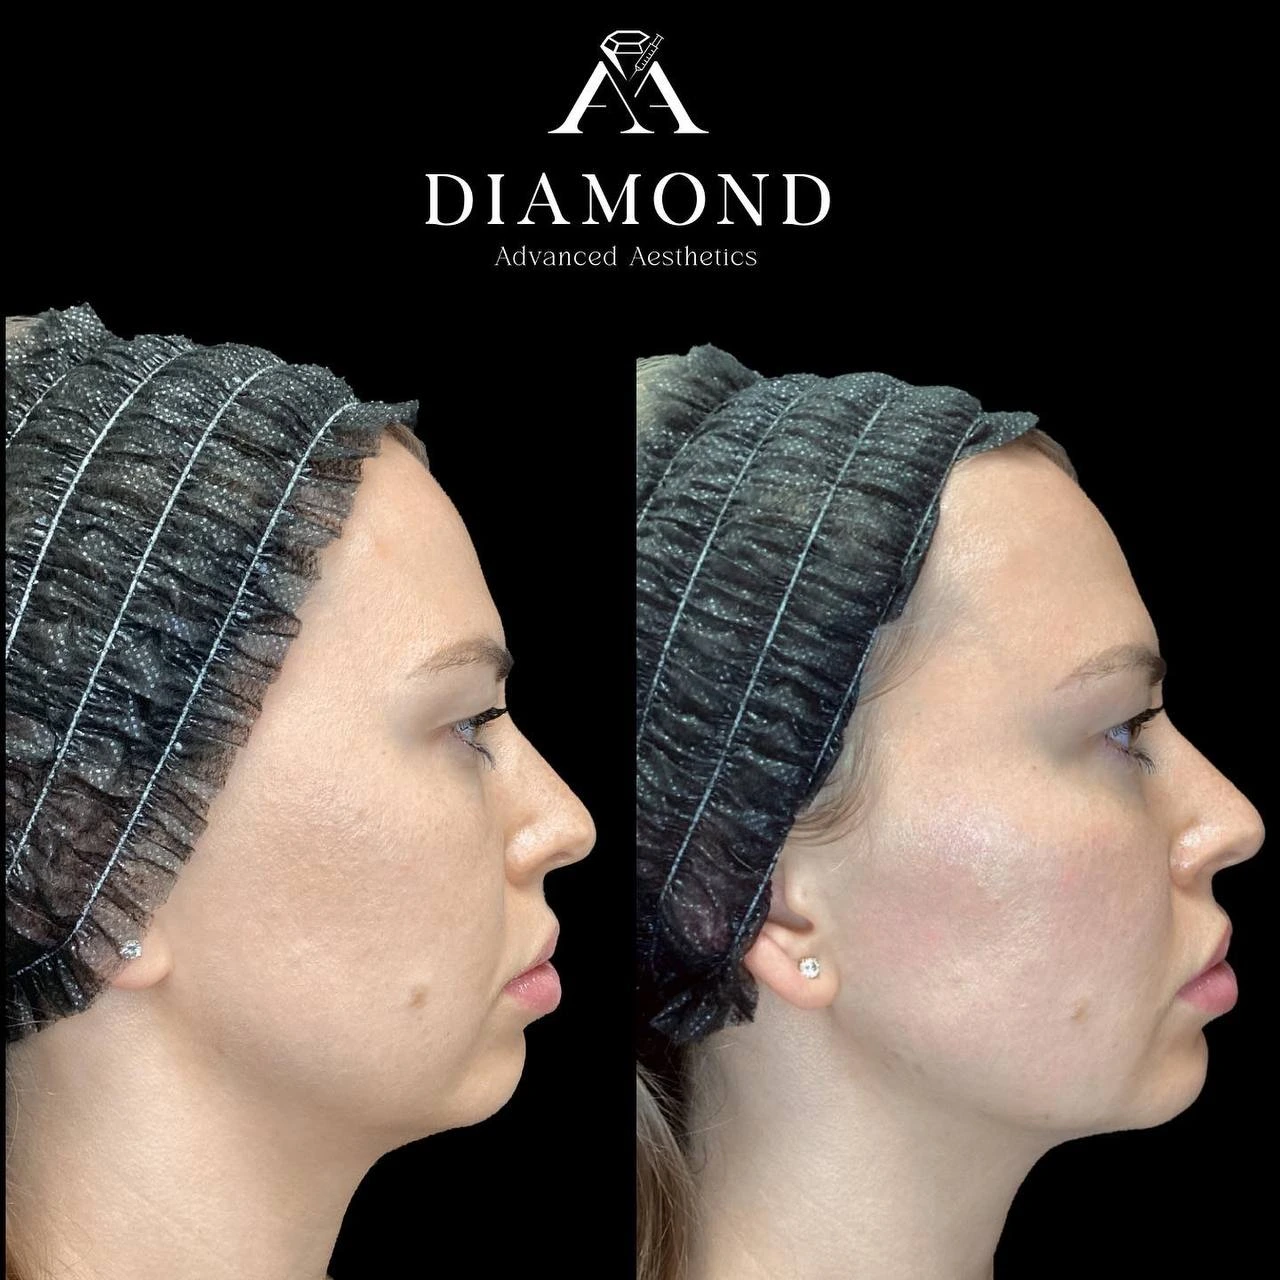 Before and After |diamond advanced aesthetics | New york |